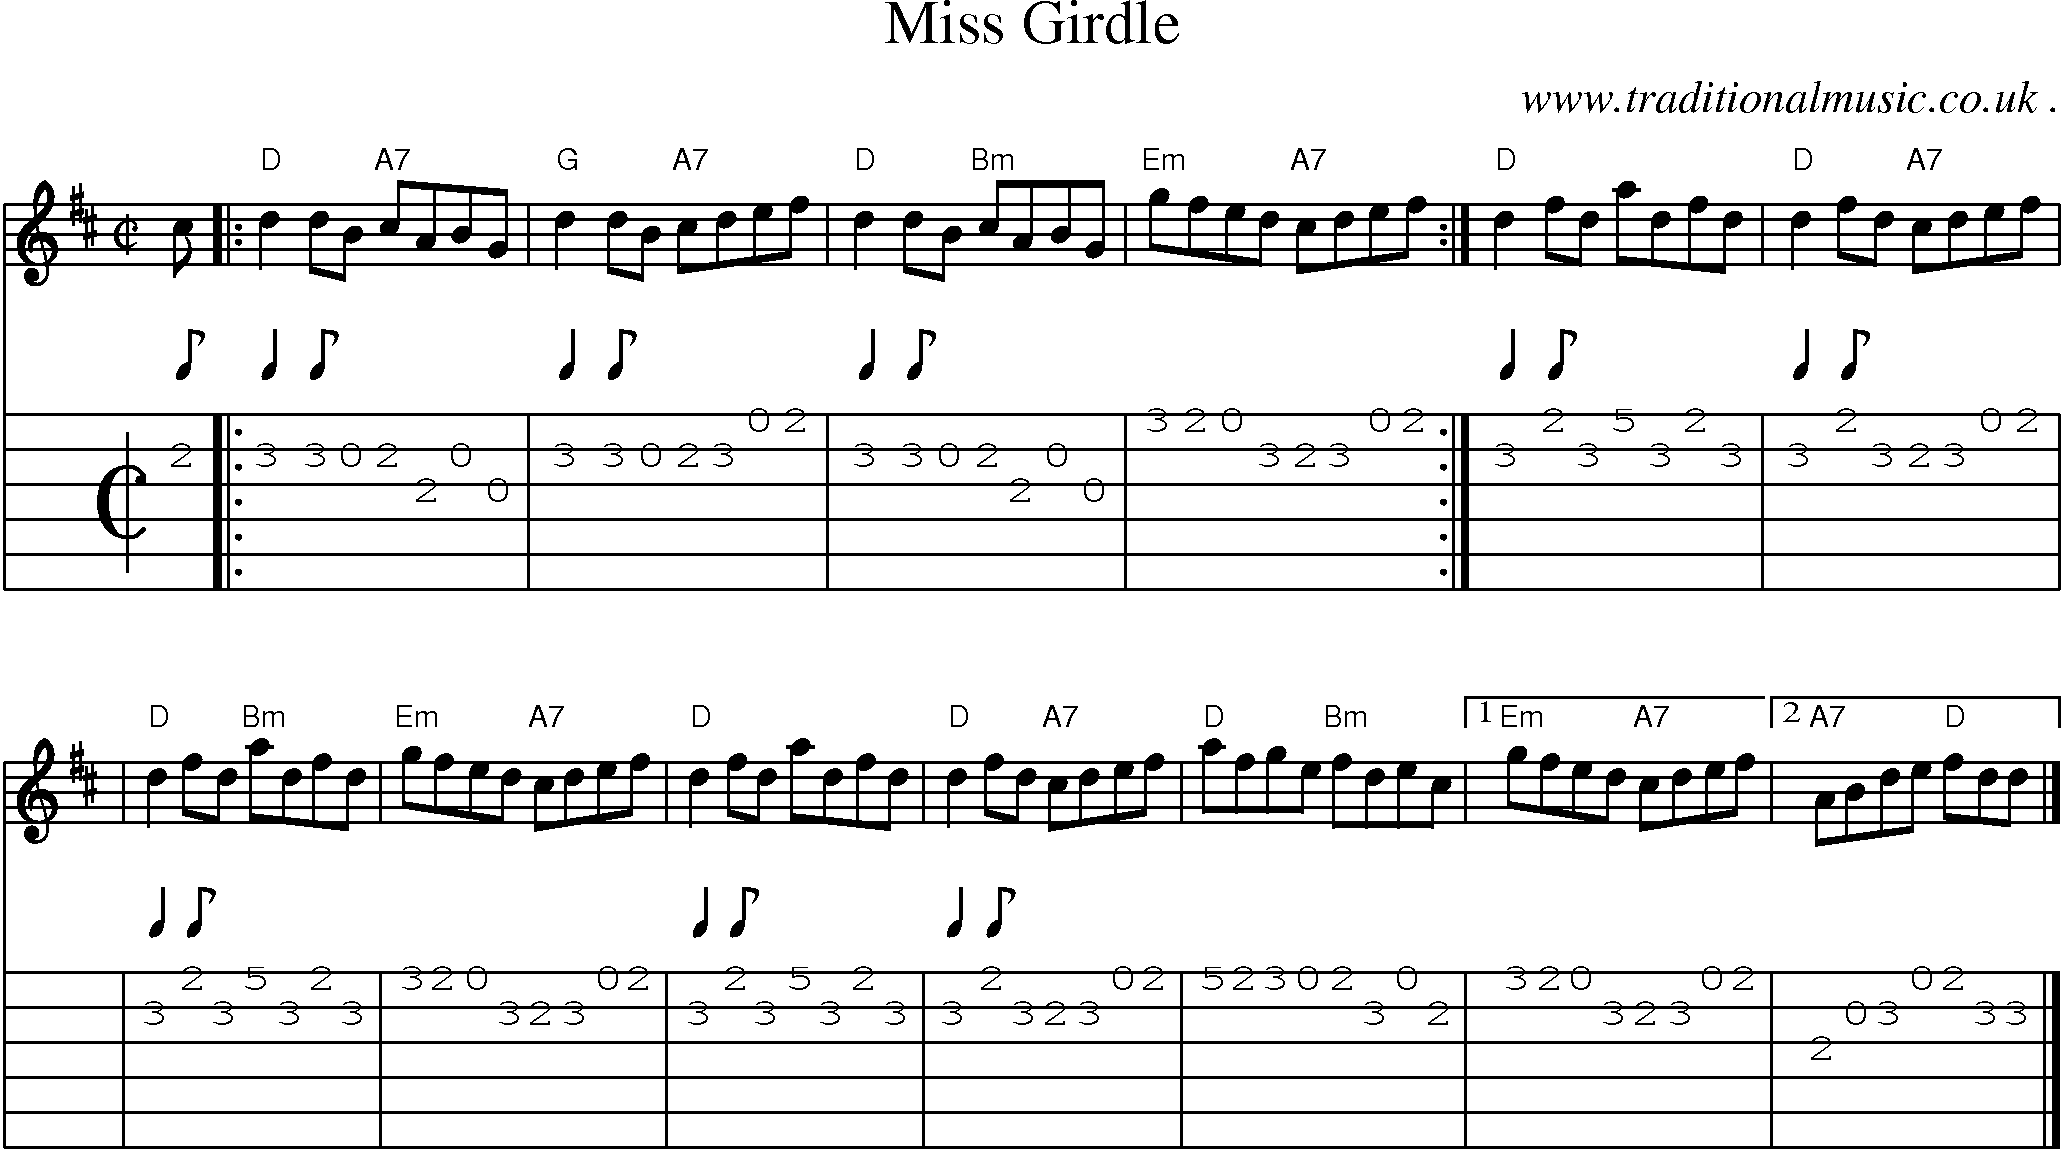 Sheet-music  score, Chords and Guitar Tabs for Miss Girdle